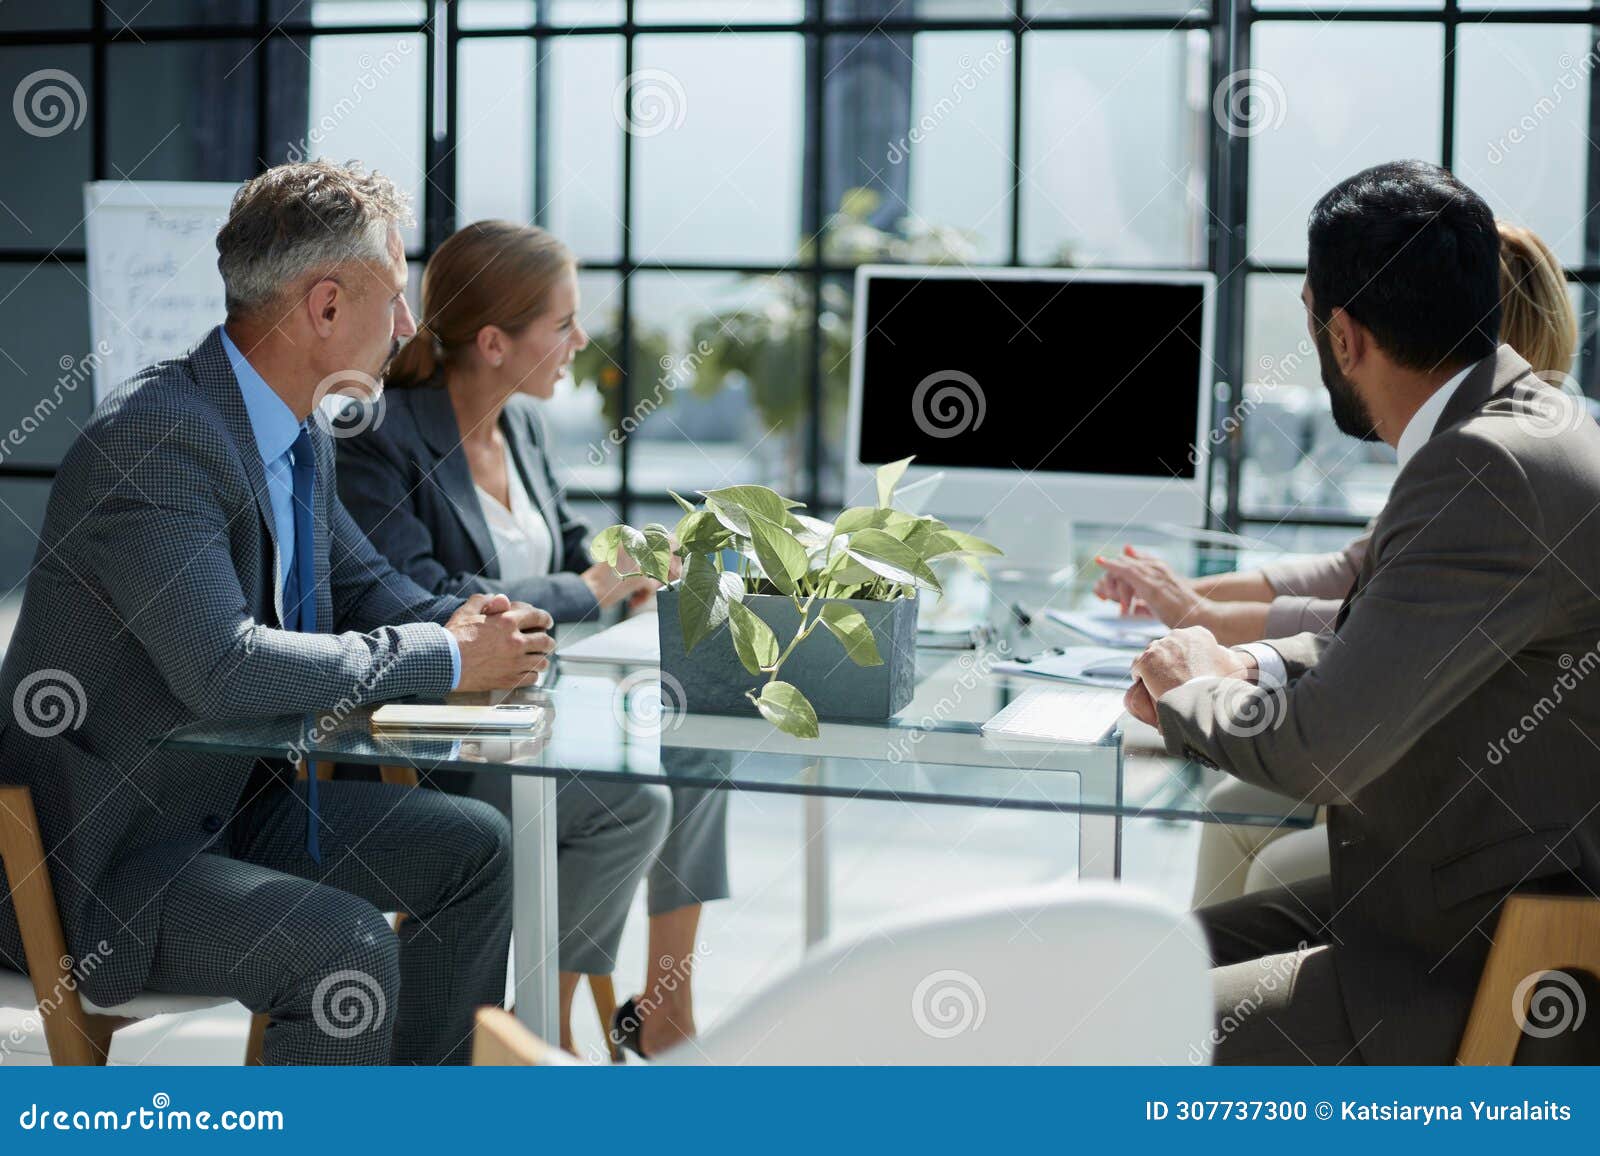 business group showing ethnic diversity in a meeting